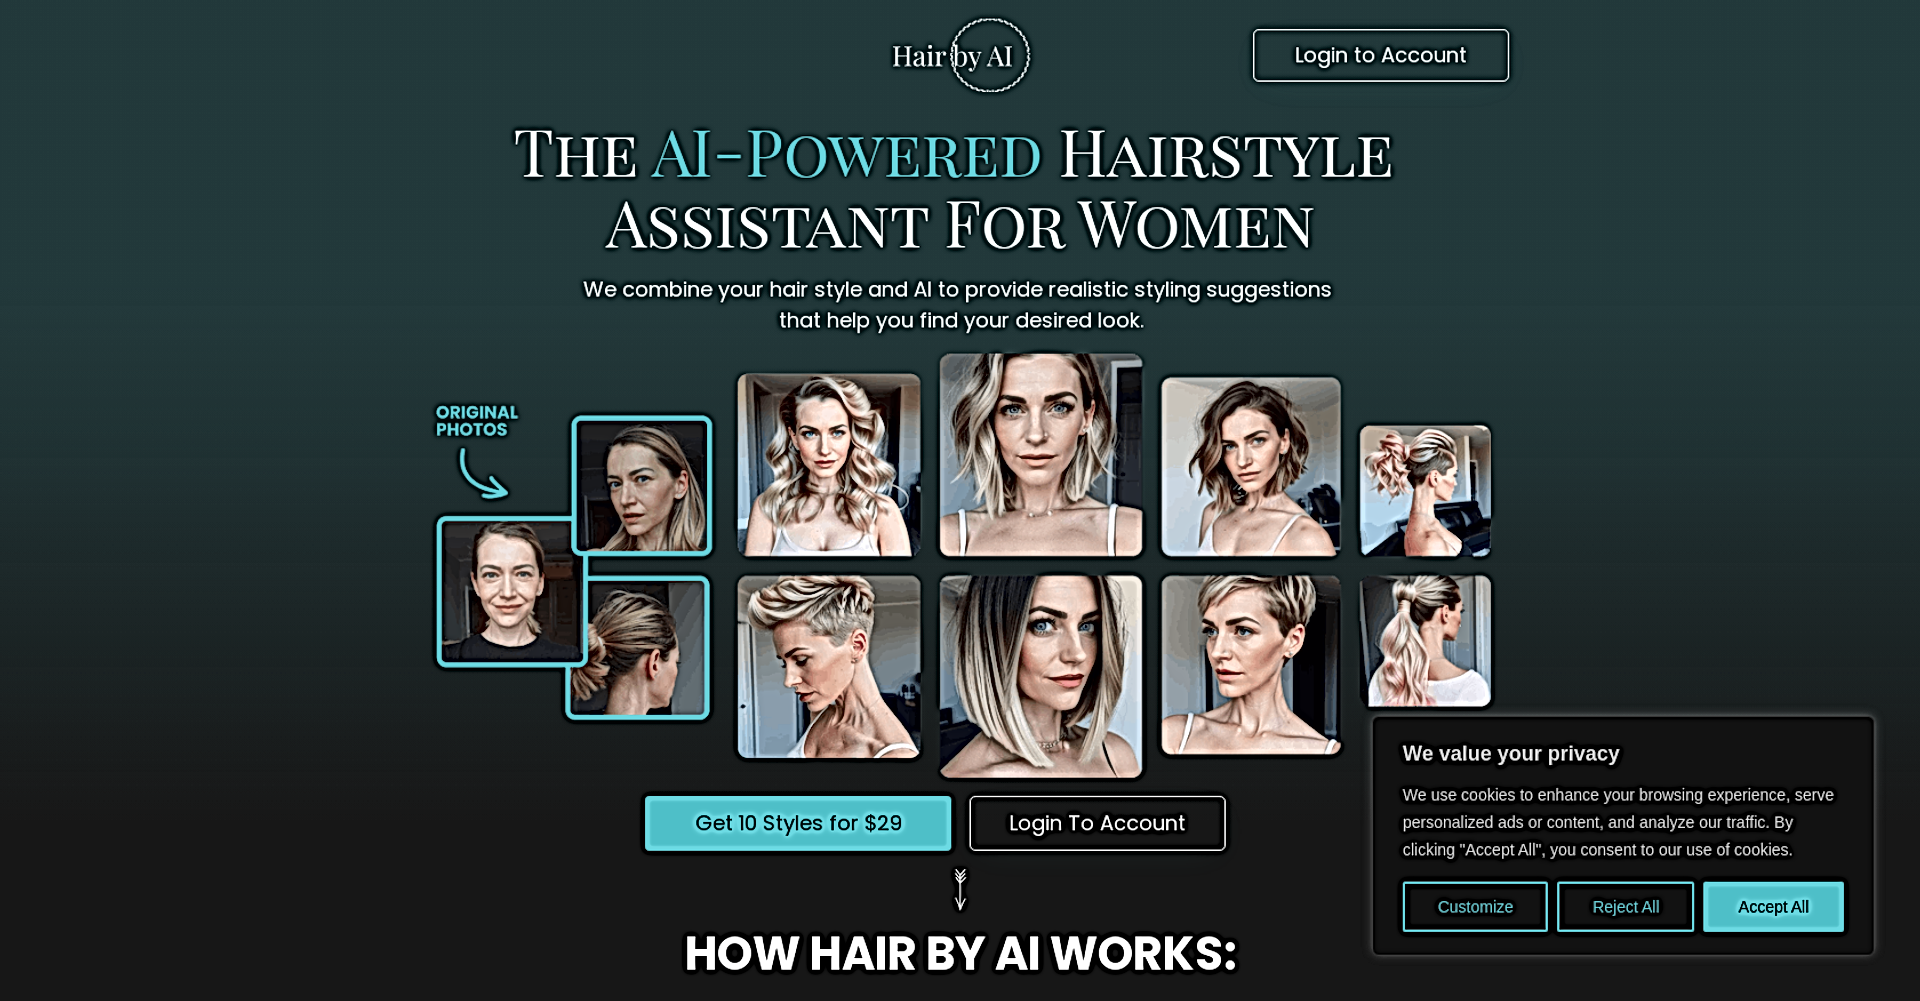 Hair by AI featured